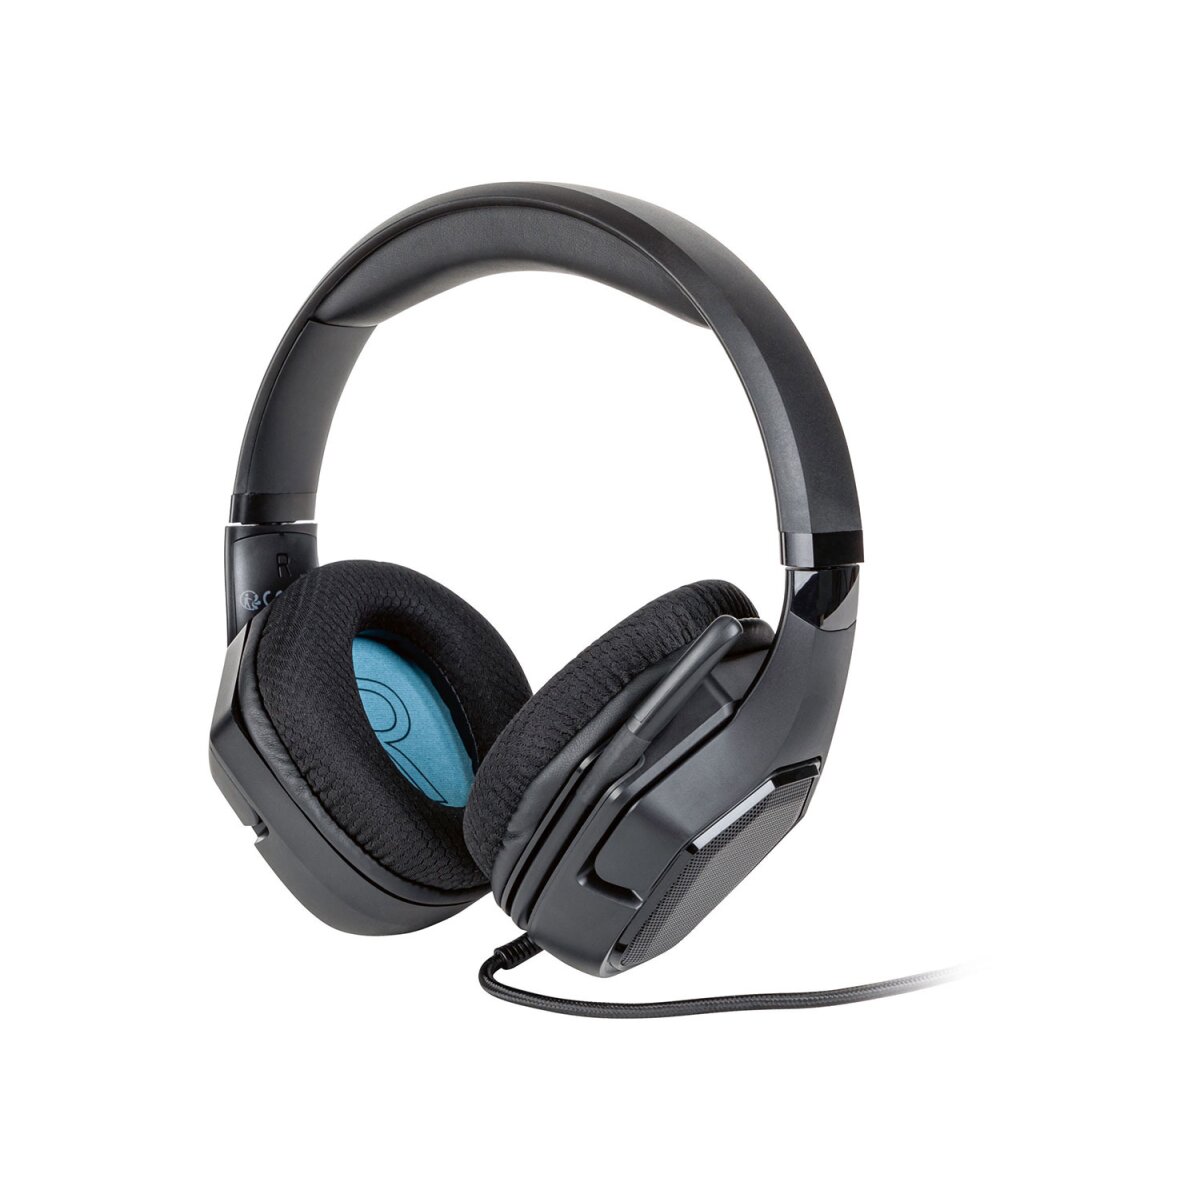 SILVERCREST® Gaming Headset 7.1 - B-Ware sehr gut, 15,99 €